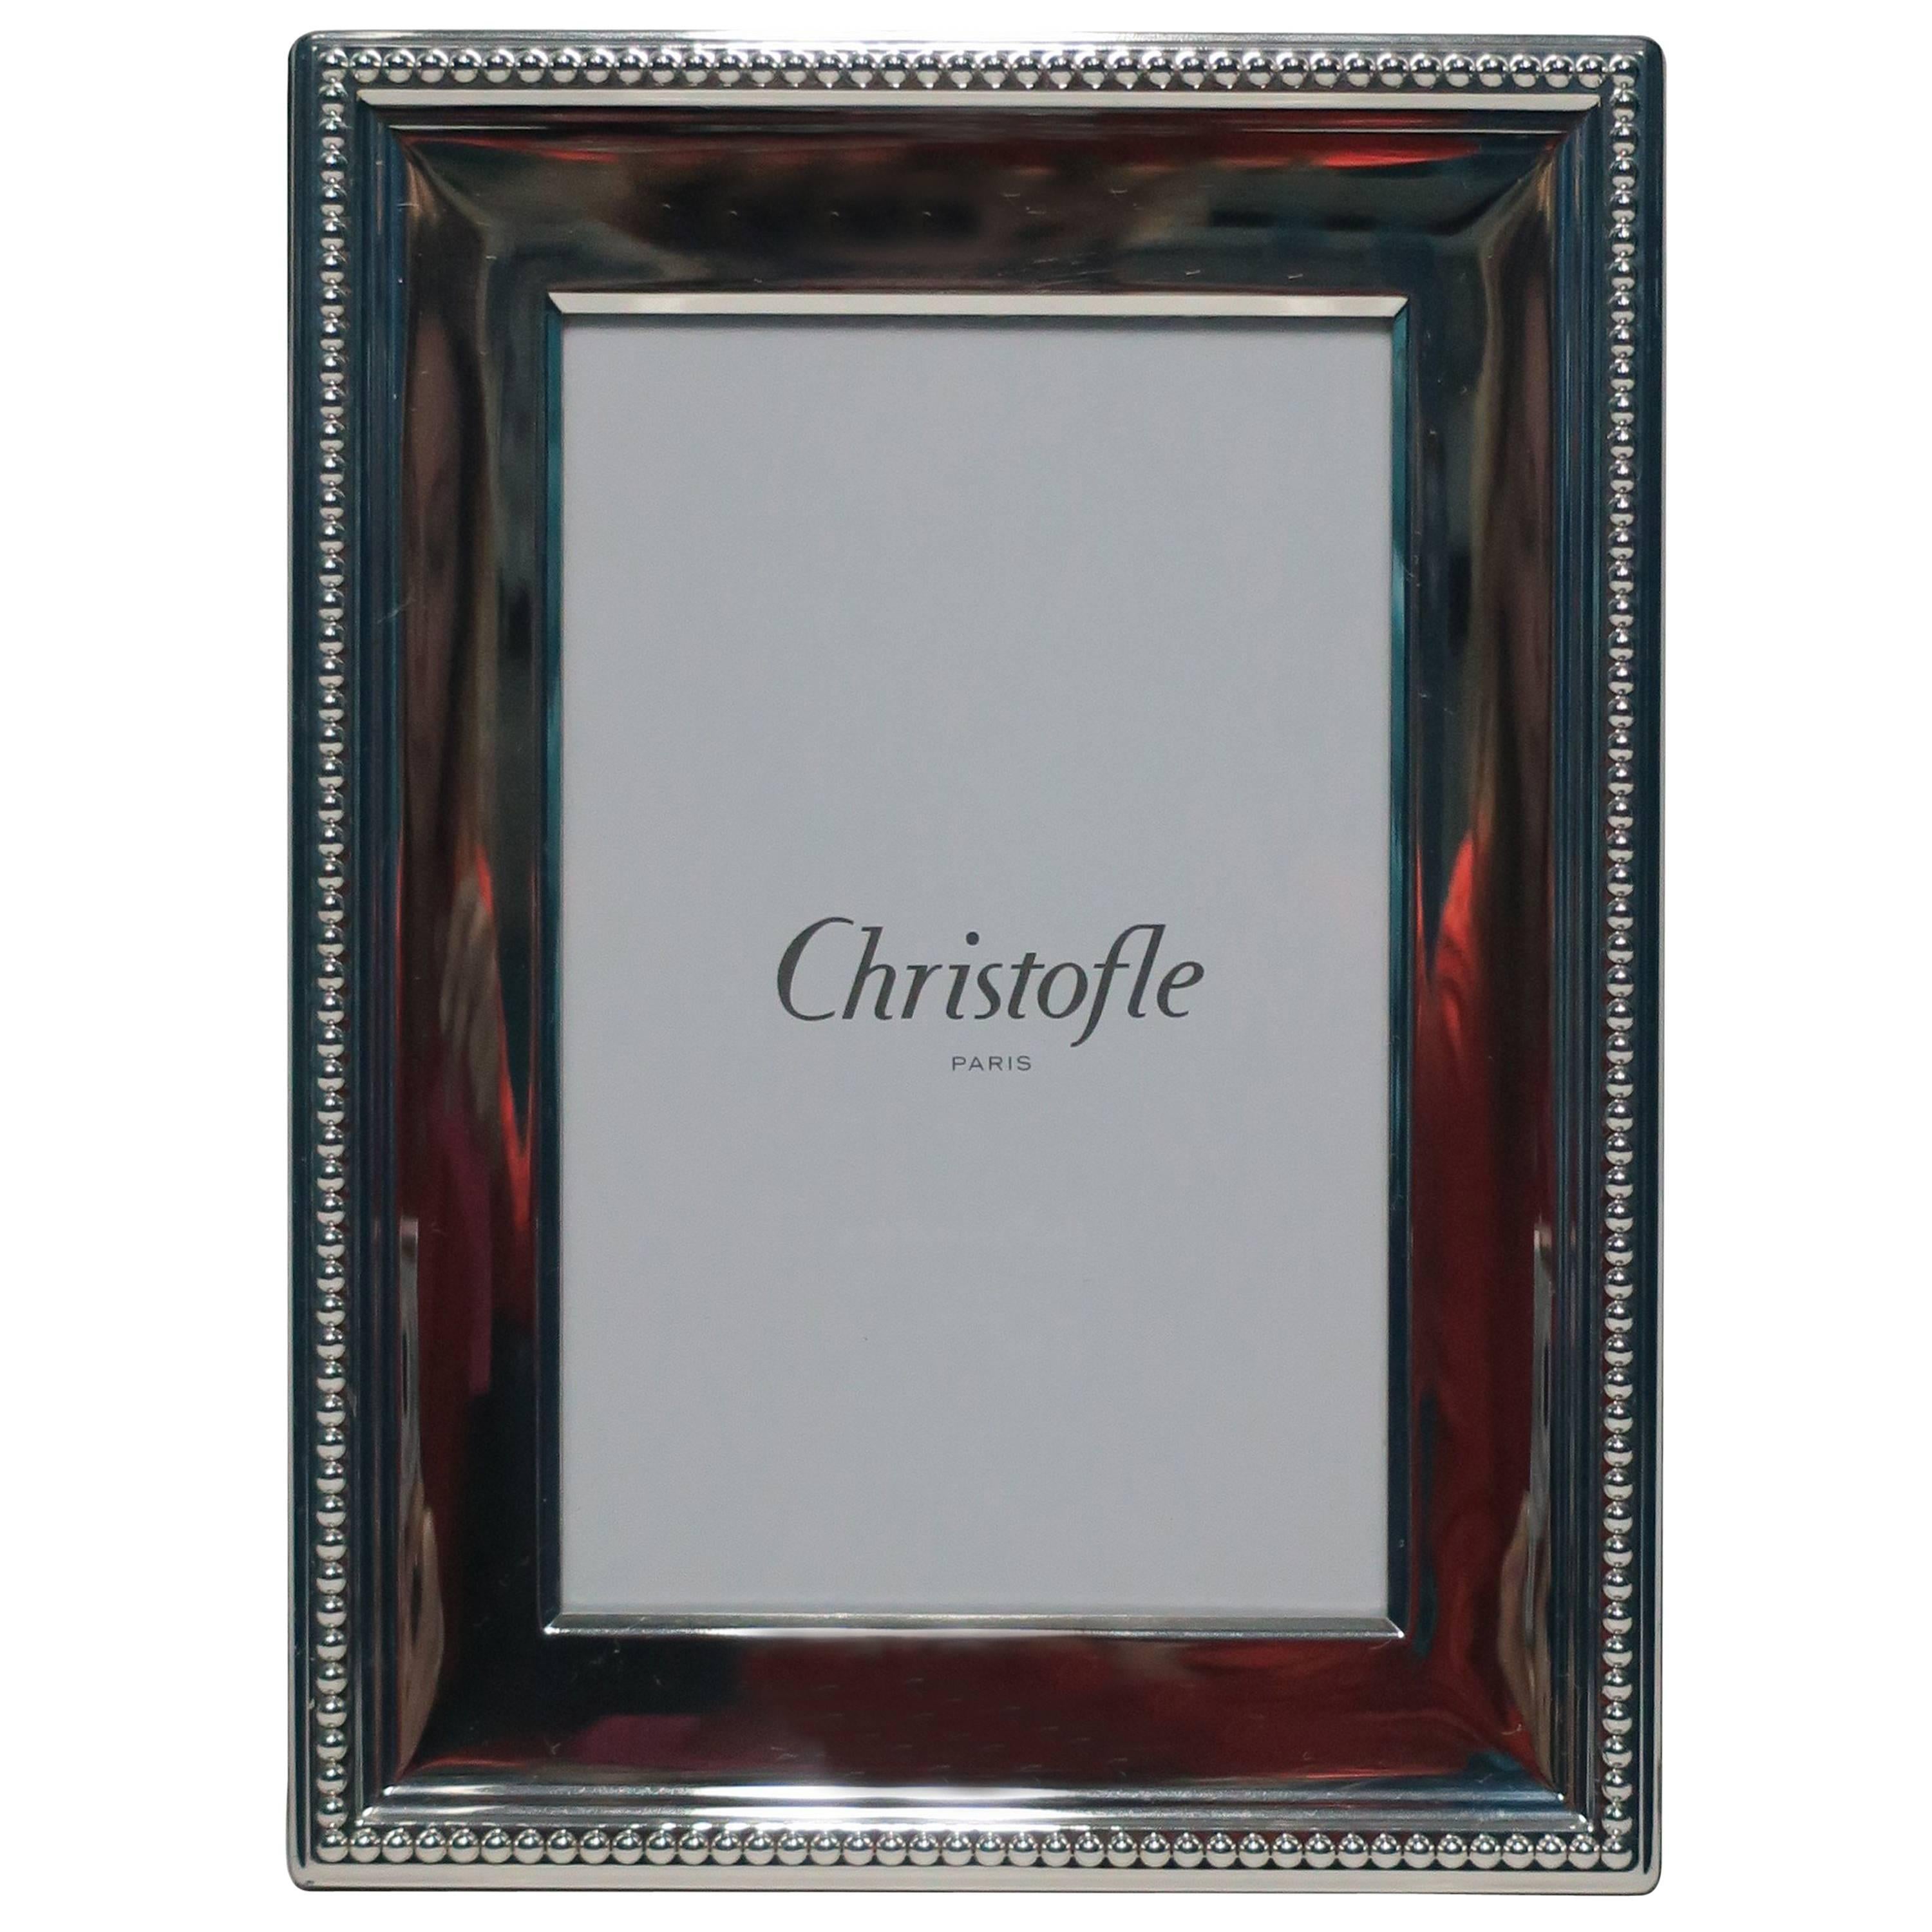 Christofle Silver Plate Picture or Photo Frame, France